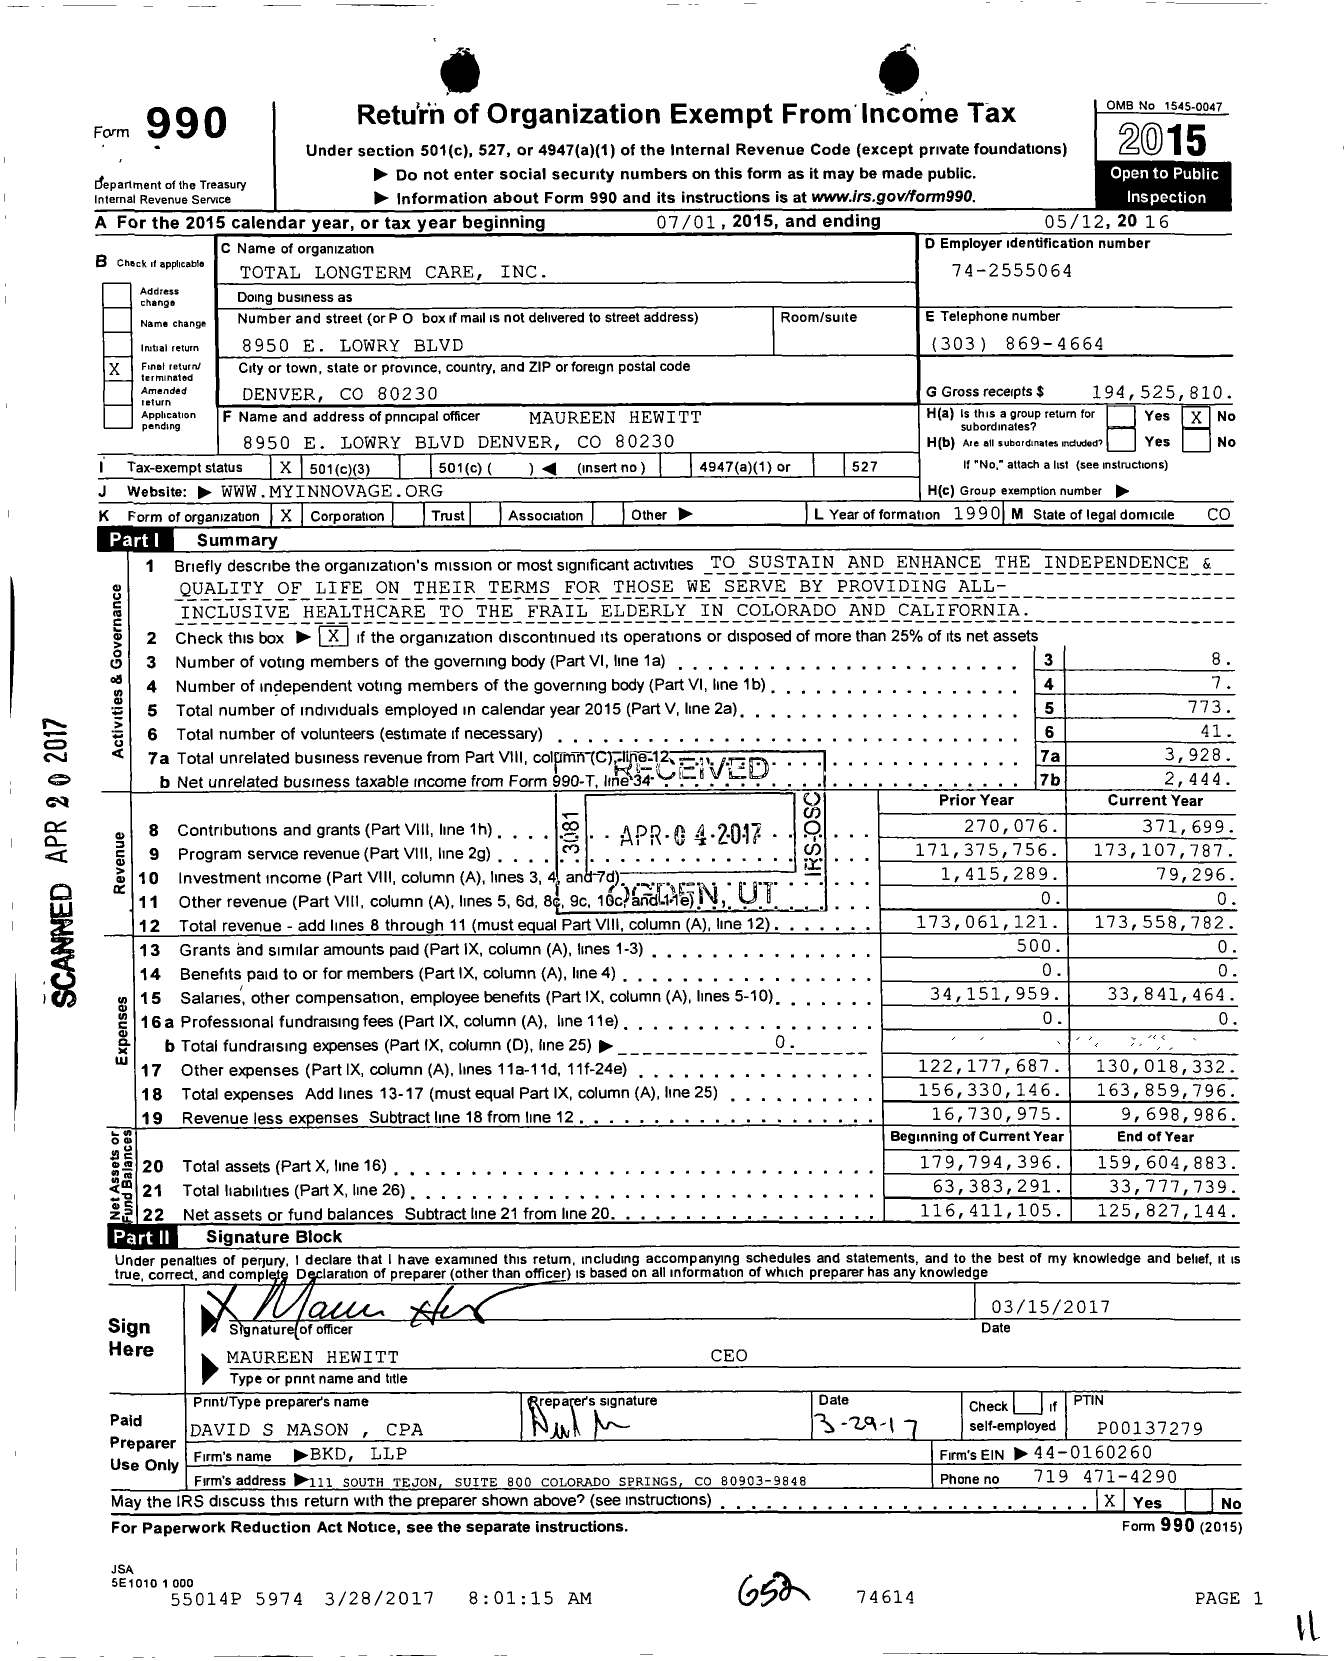 Image of first page of 2015 Form 990 for Total Longterm Care